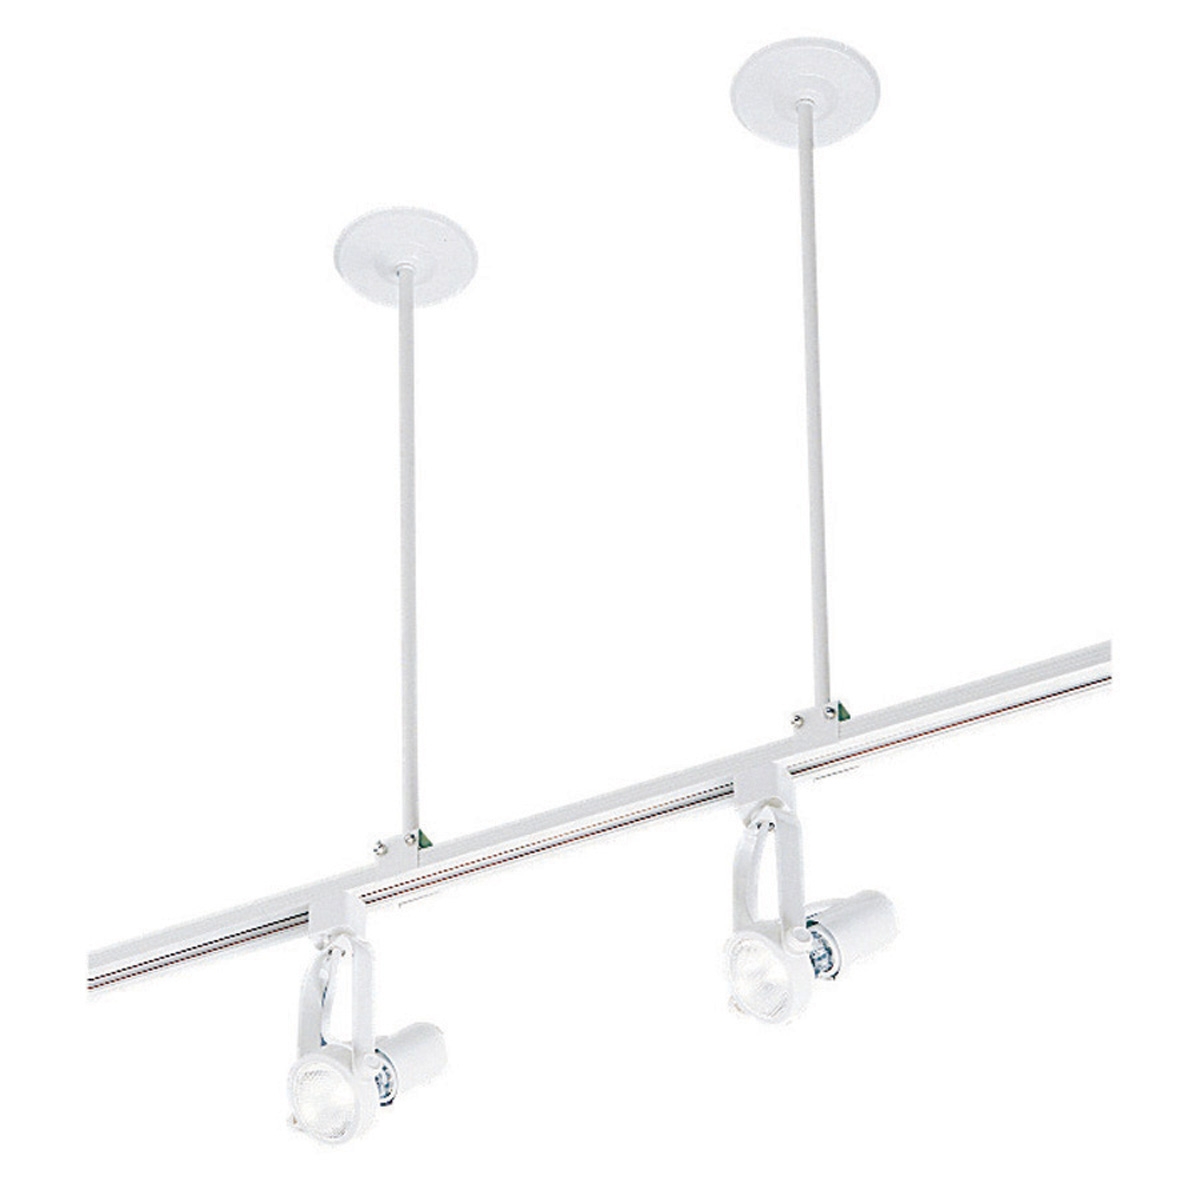 Suspended Ceiling Light Fixture Bracketlighting awesome drop ceiling light 56 in flush mount ceiling